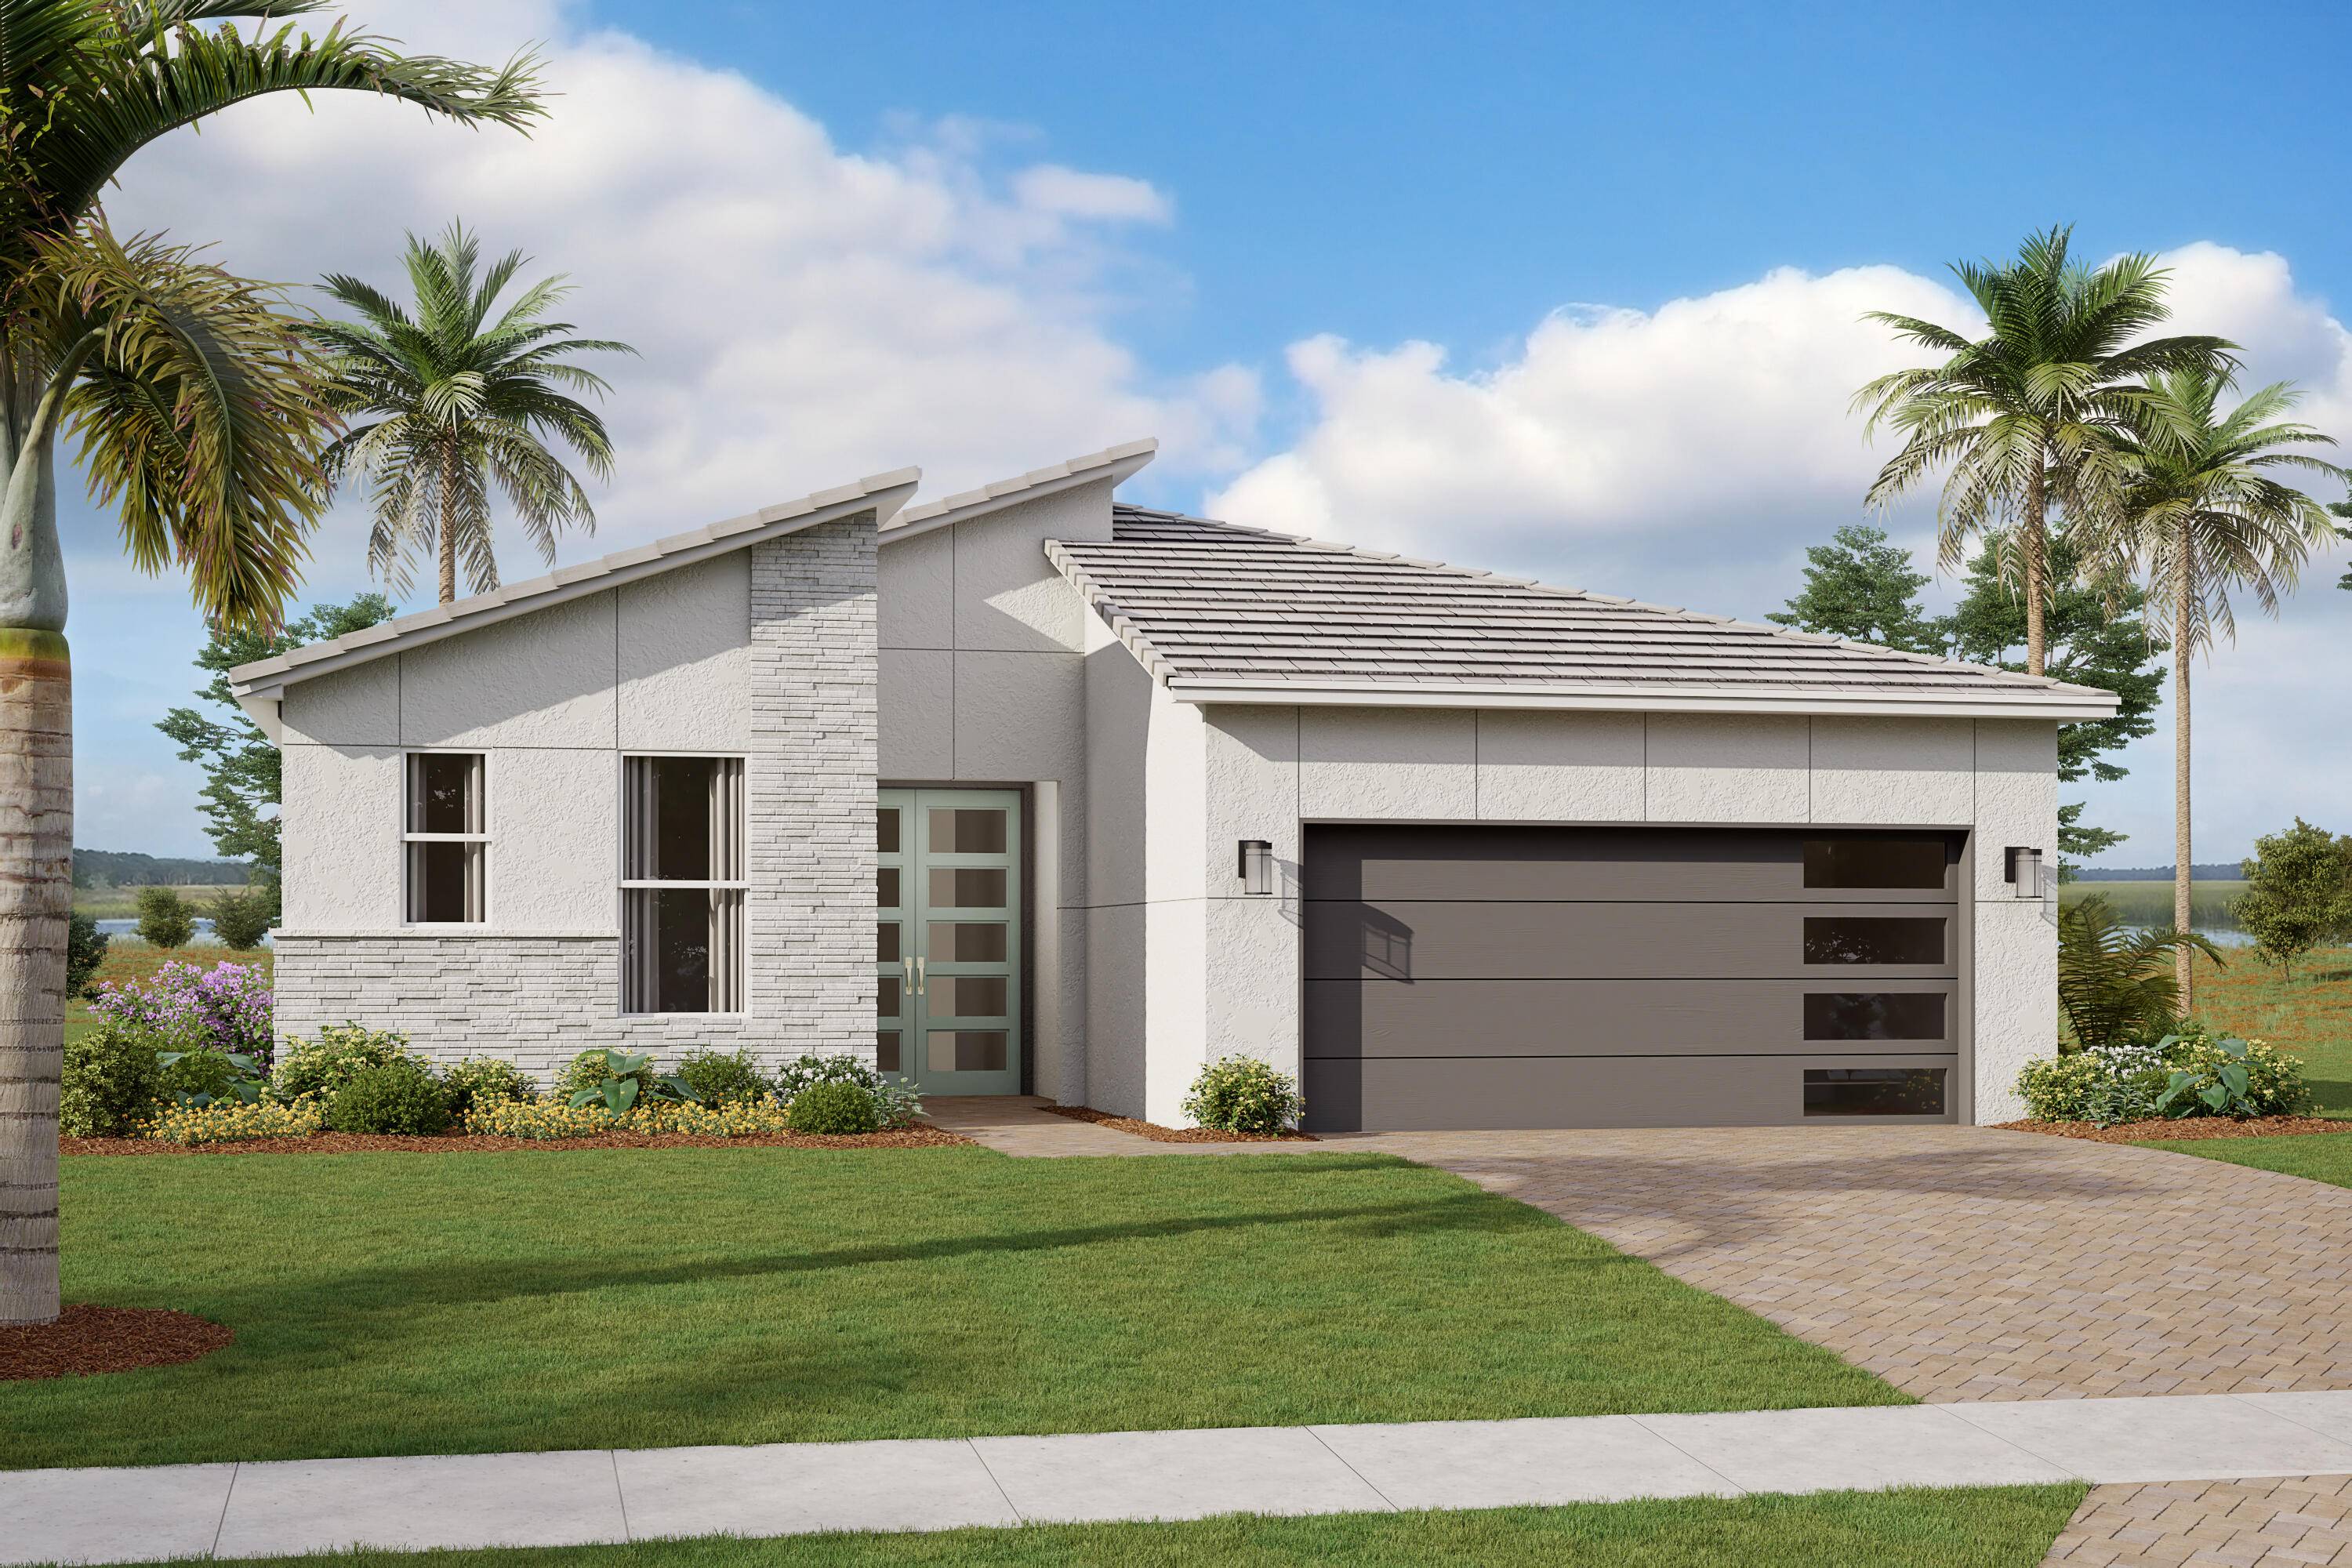 This 1, 969 sq. ft. Sage floorplan includes 2 beds and 2 baths as well as as flex room that can be customized to suit your needs.